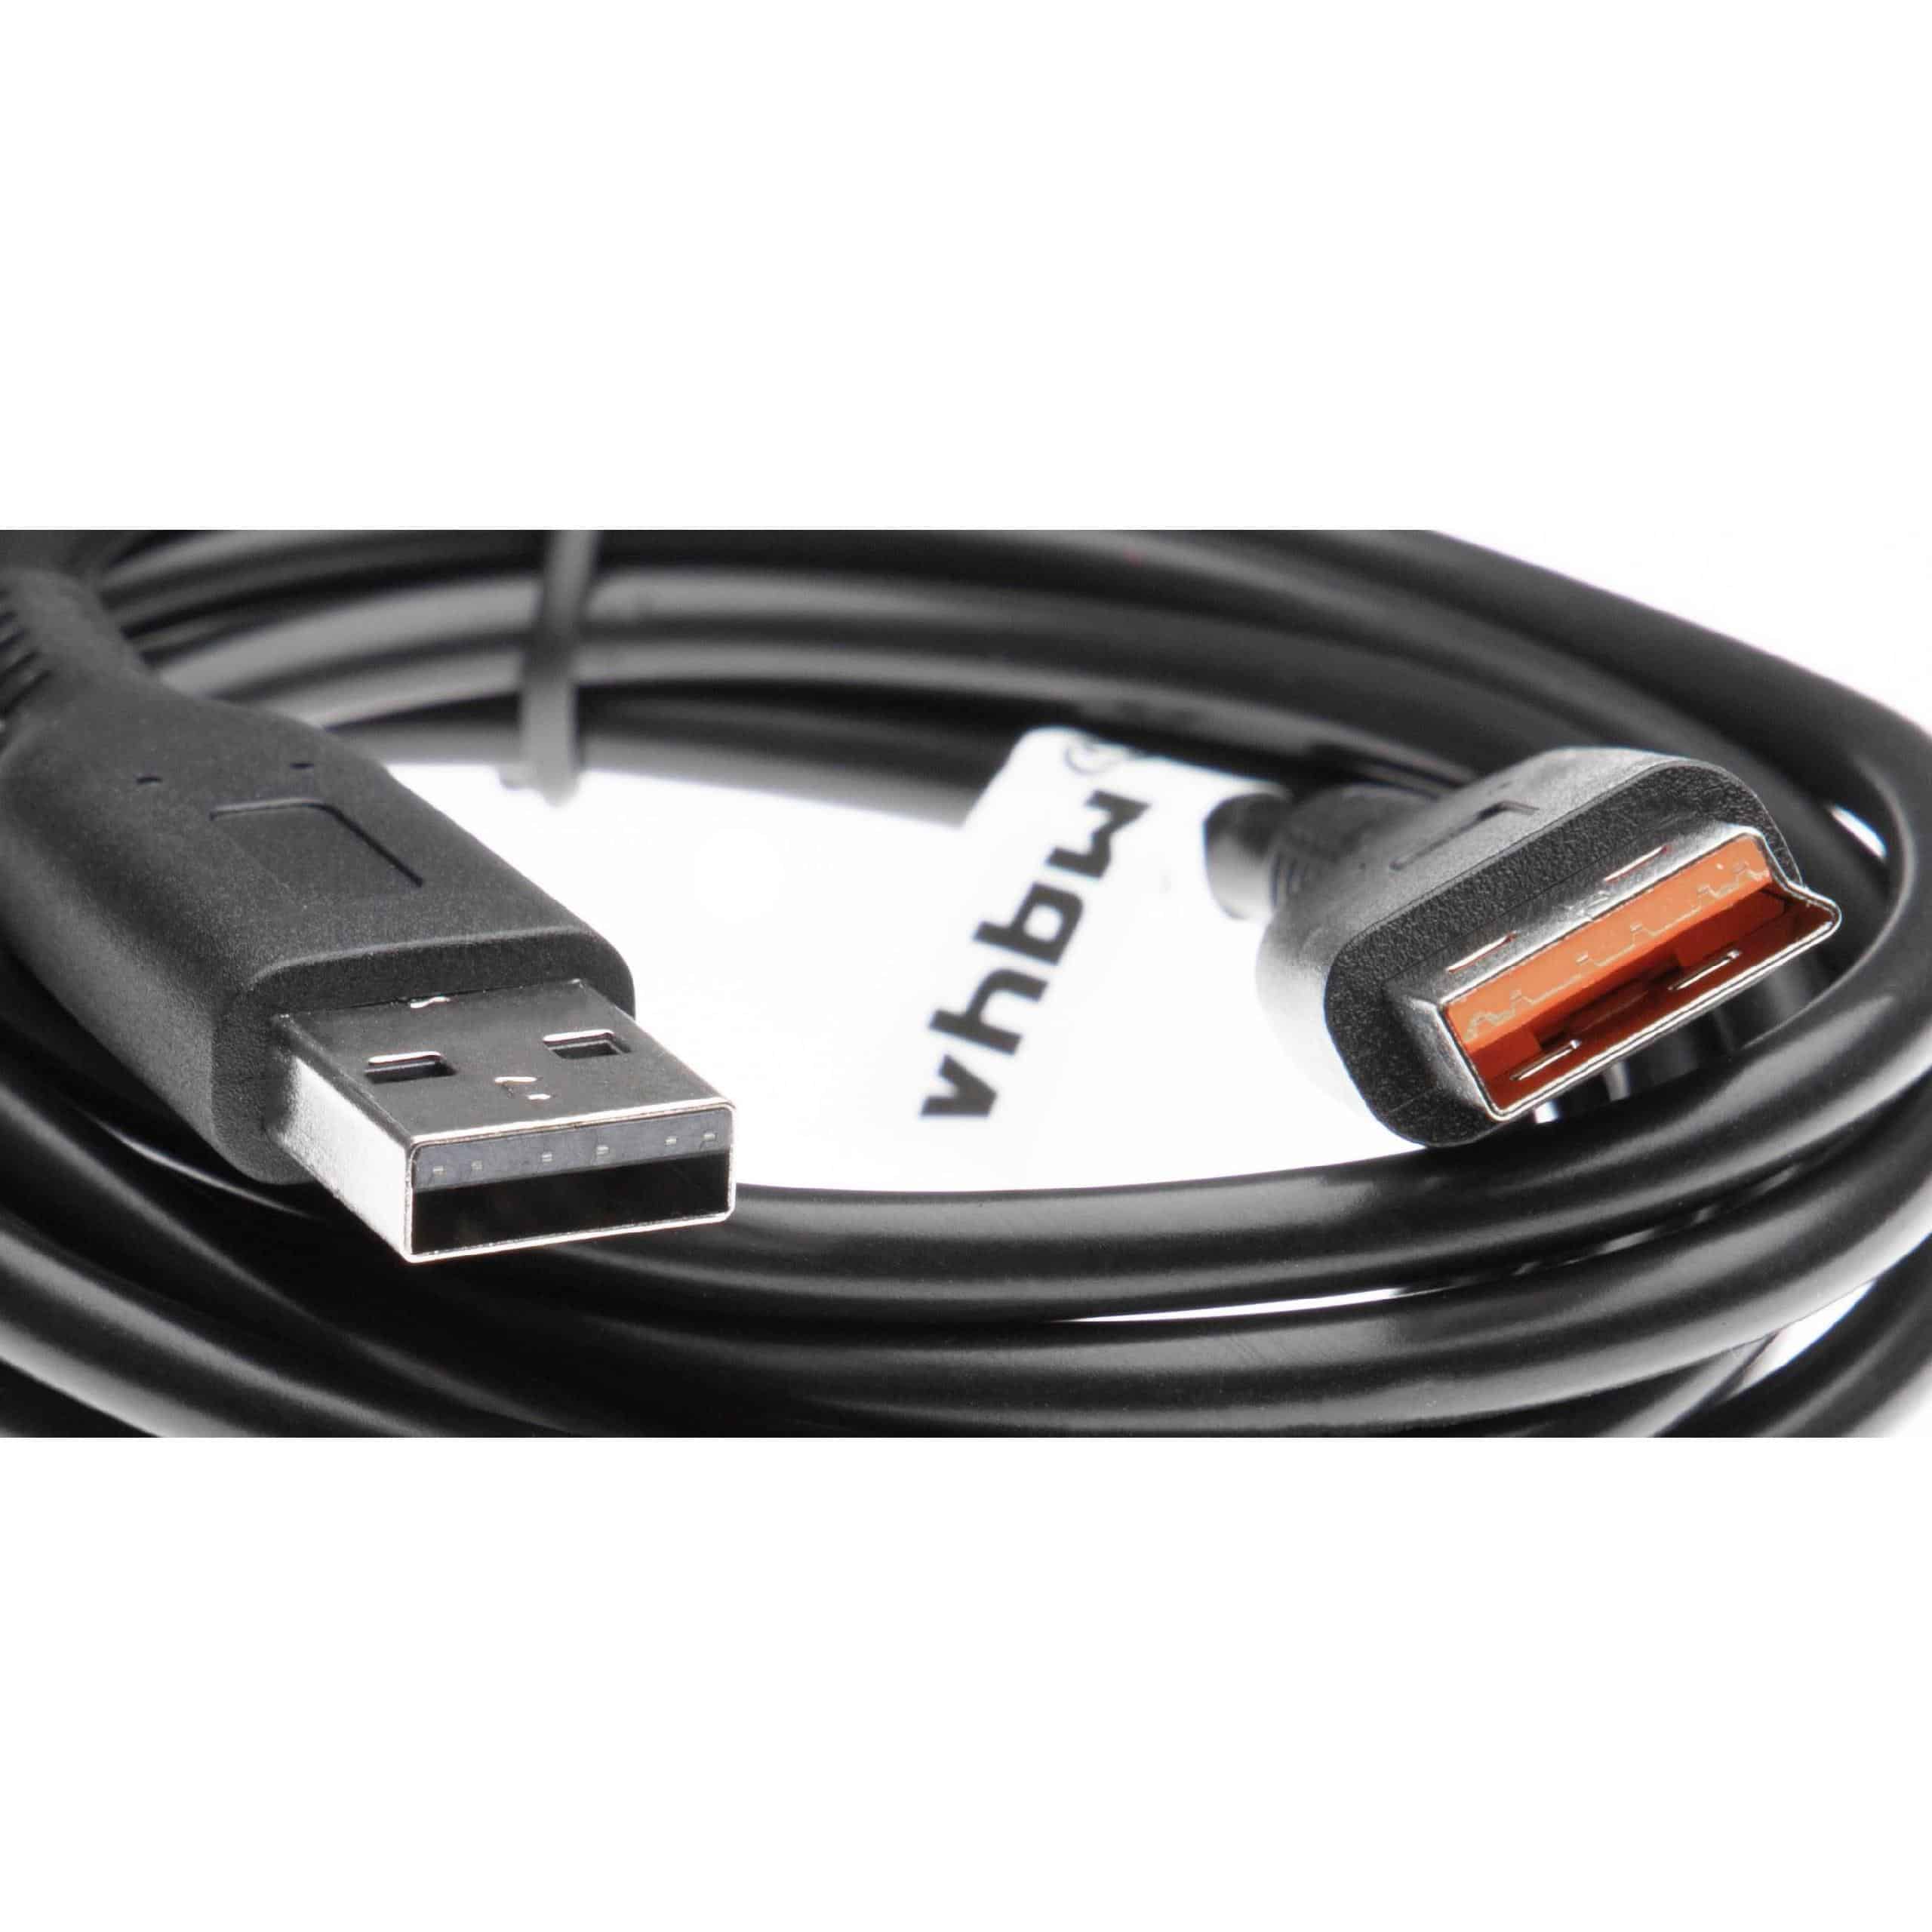 vhbw USB Data Cable Tablet - 2in1 Charging Cable (Standard-USB Type A to Tablet) 200cm Black 